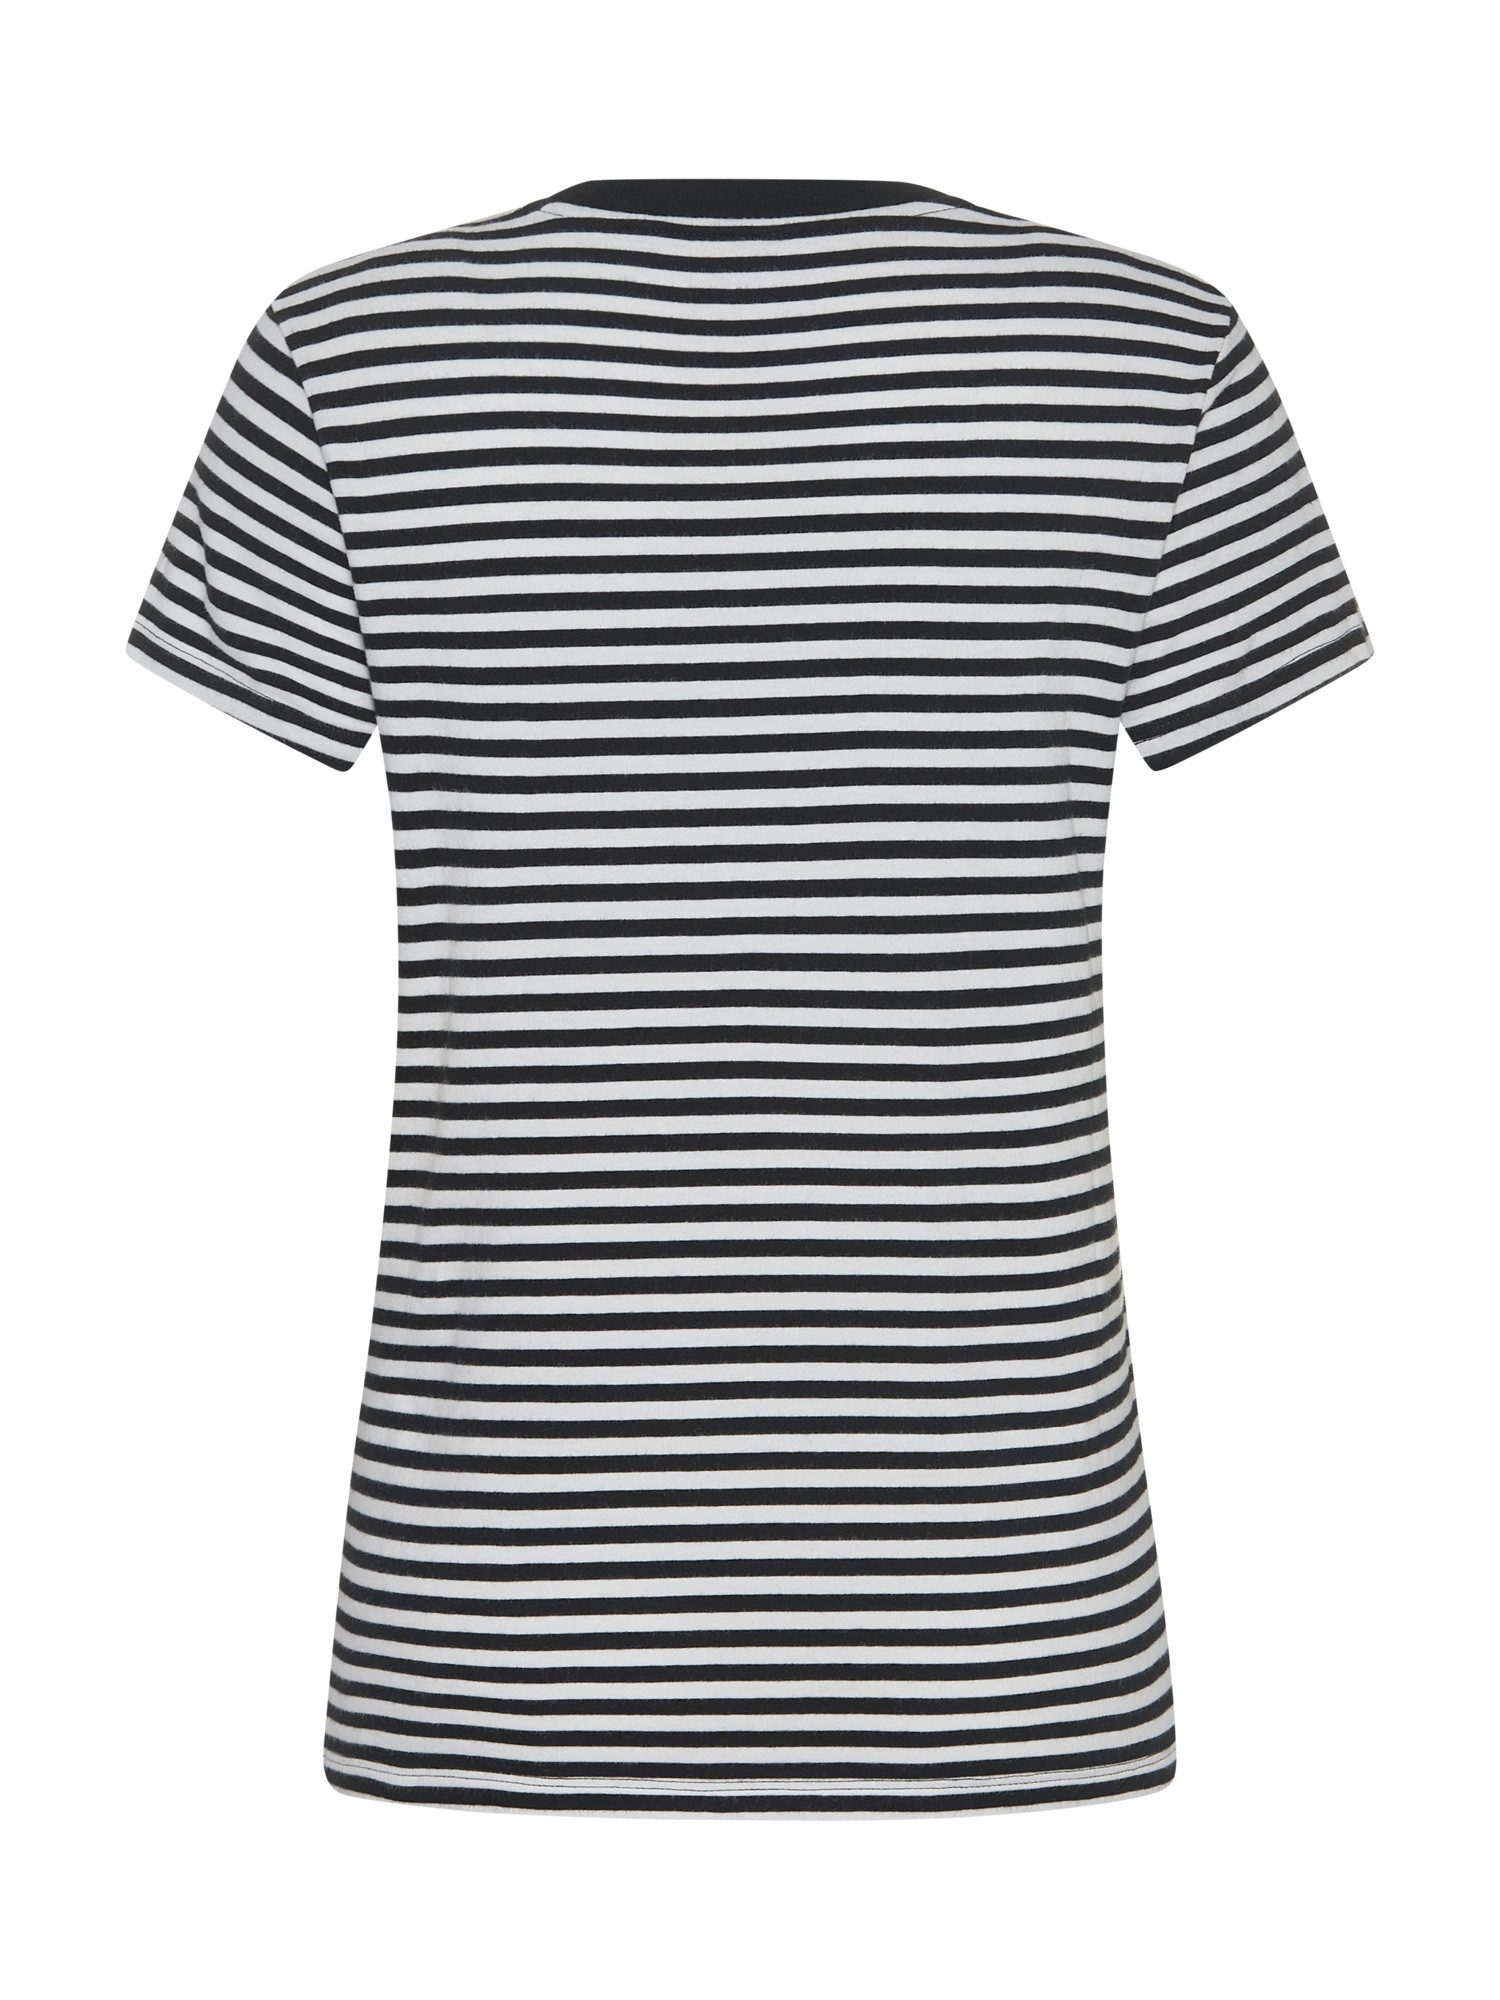 Levi's - Striped cotton T-shirt with logo, White, large image number 1